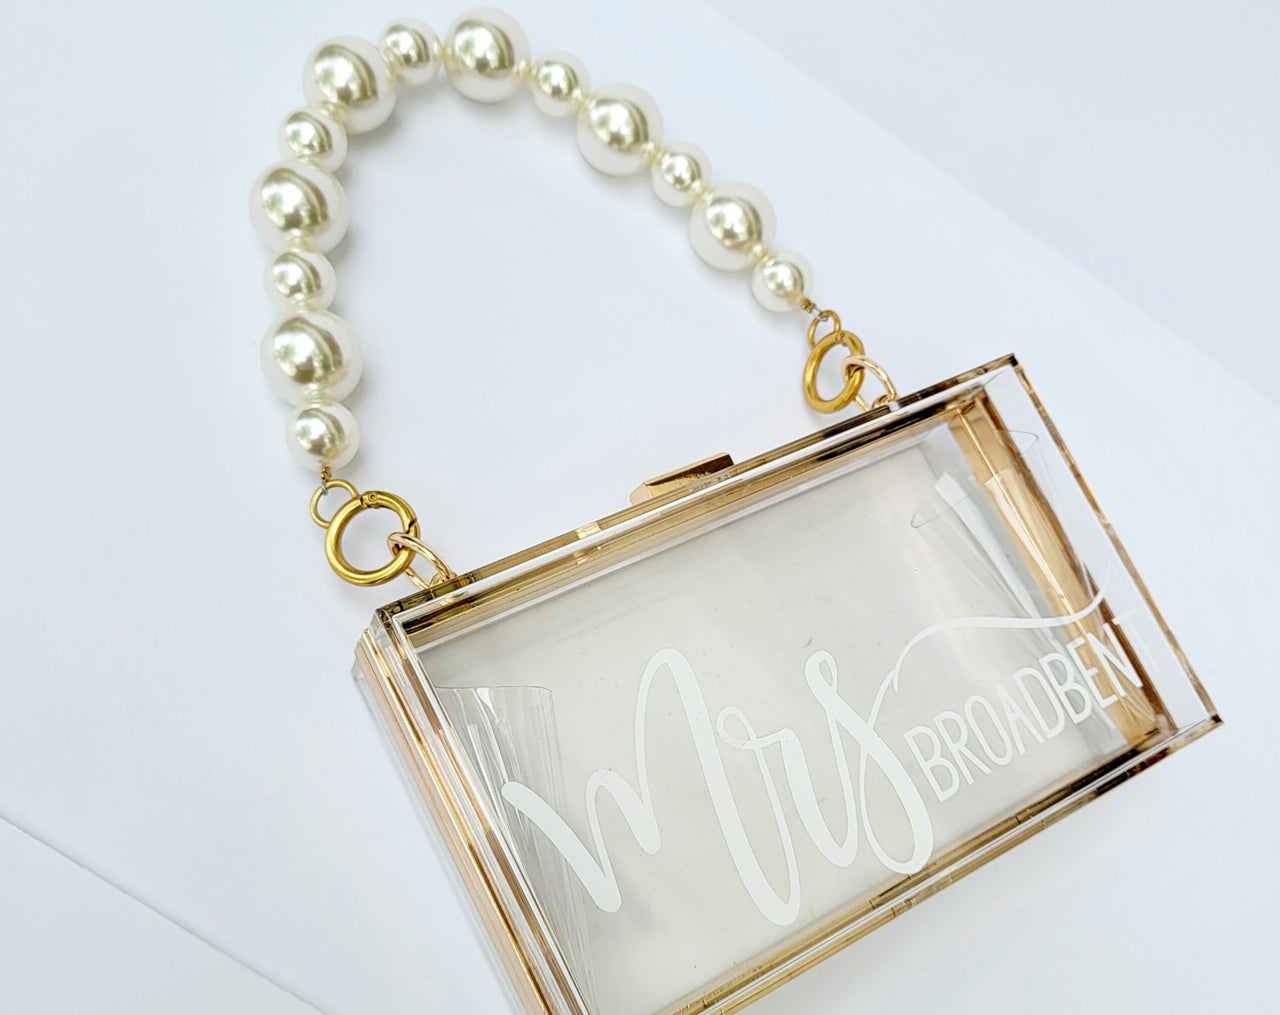 Personalized Acrylic Bridal Clutch for Mrs Bride Bridesmaid Maid of Honor Gift Bachelorette Party Favors Honeymoon Bag Going out CL1